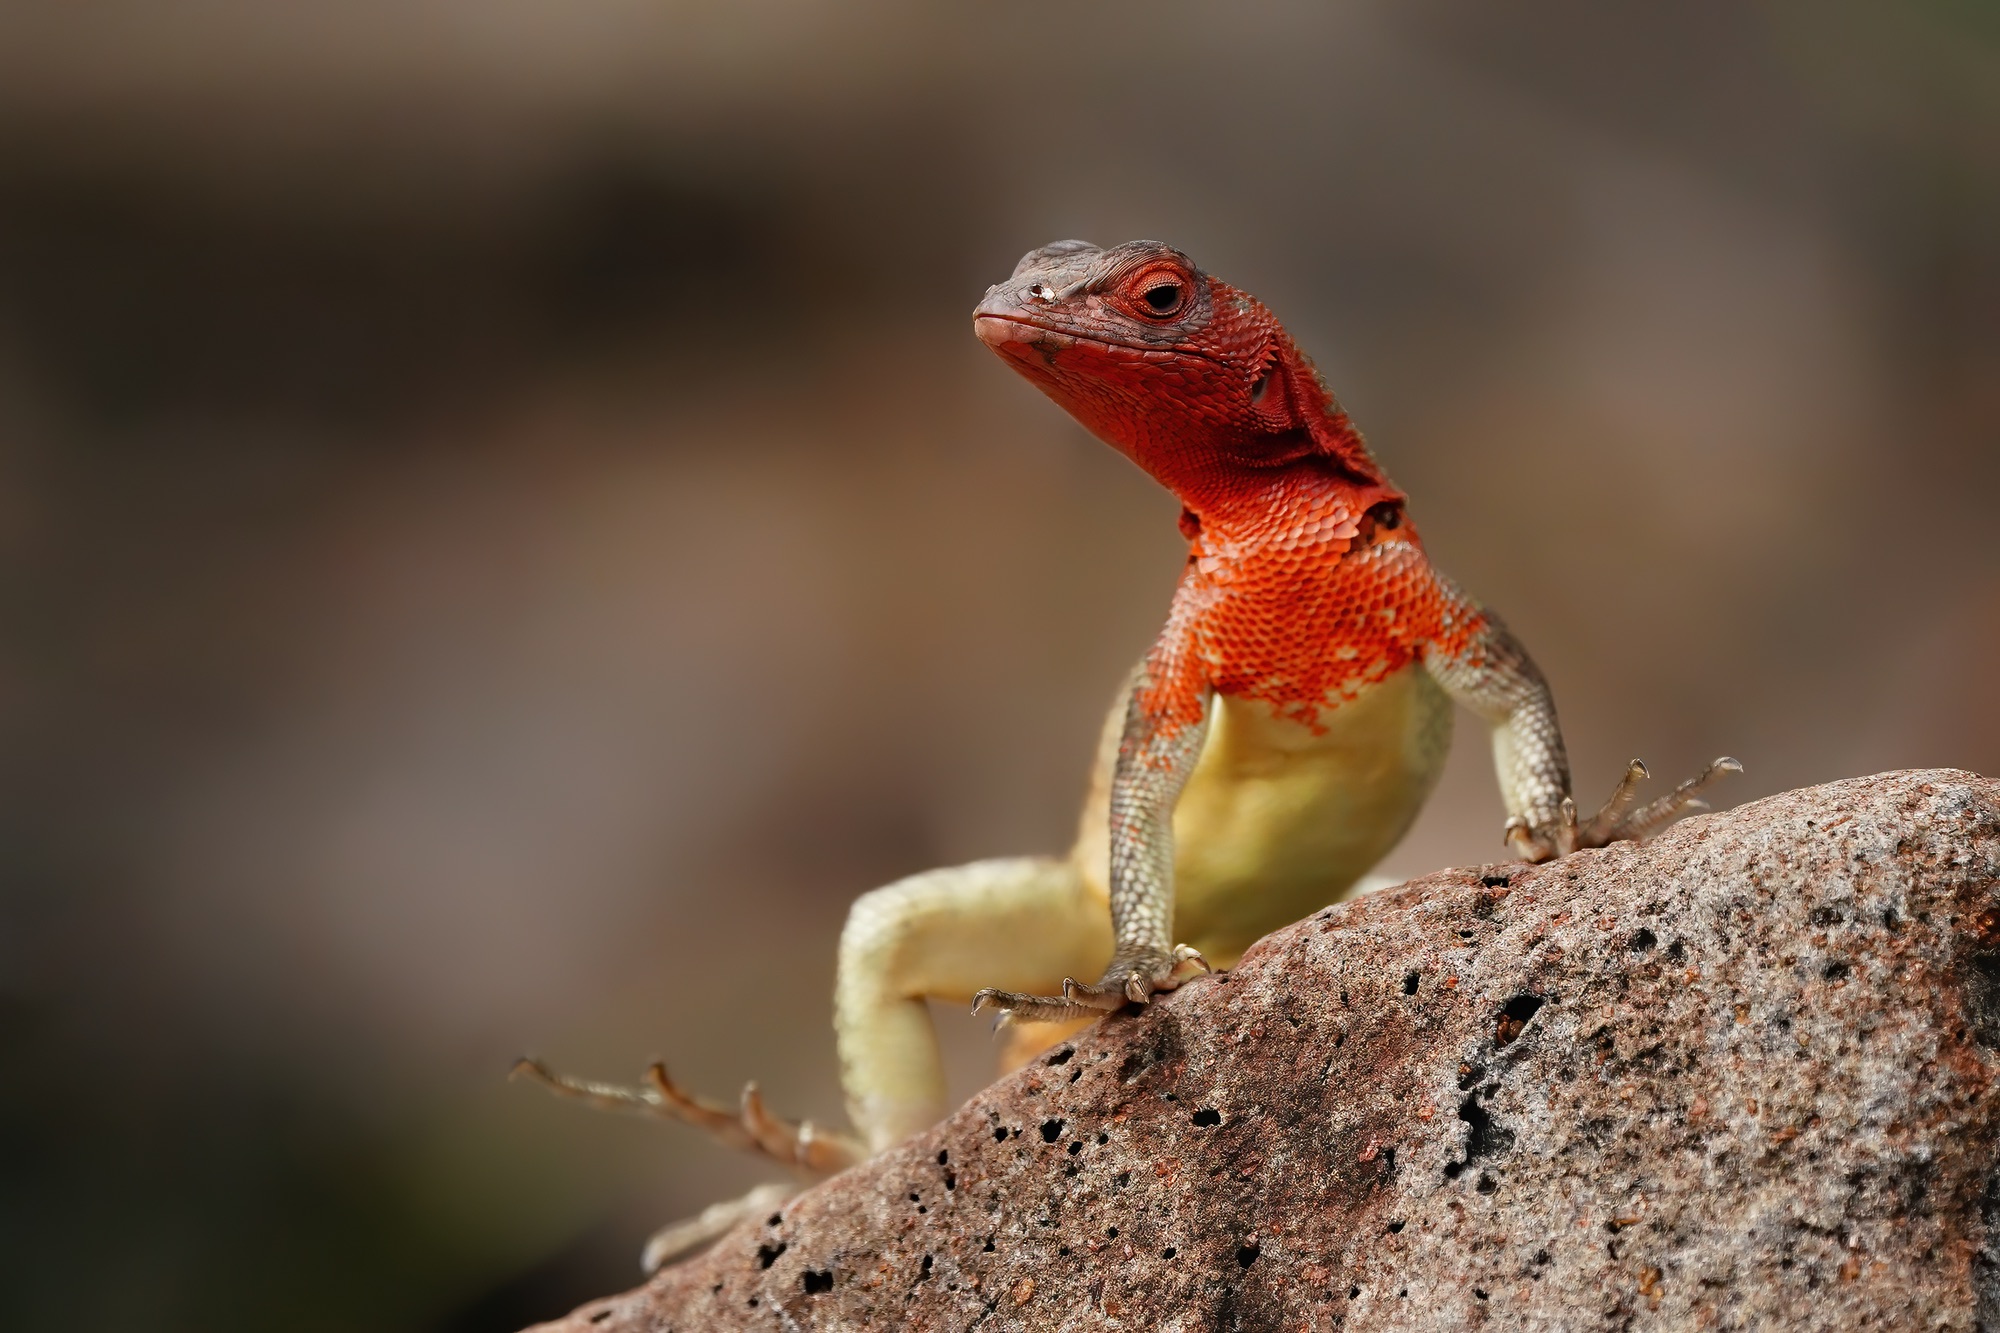 Galapagos Islands Guided Photography Experience - Lava Lizard